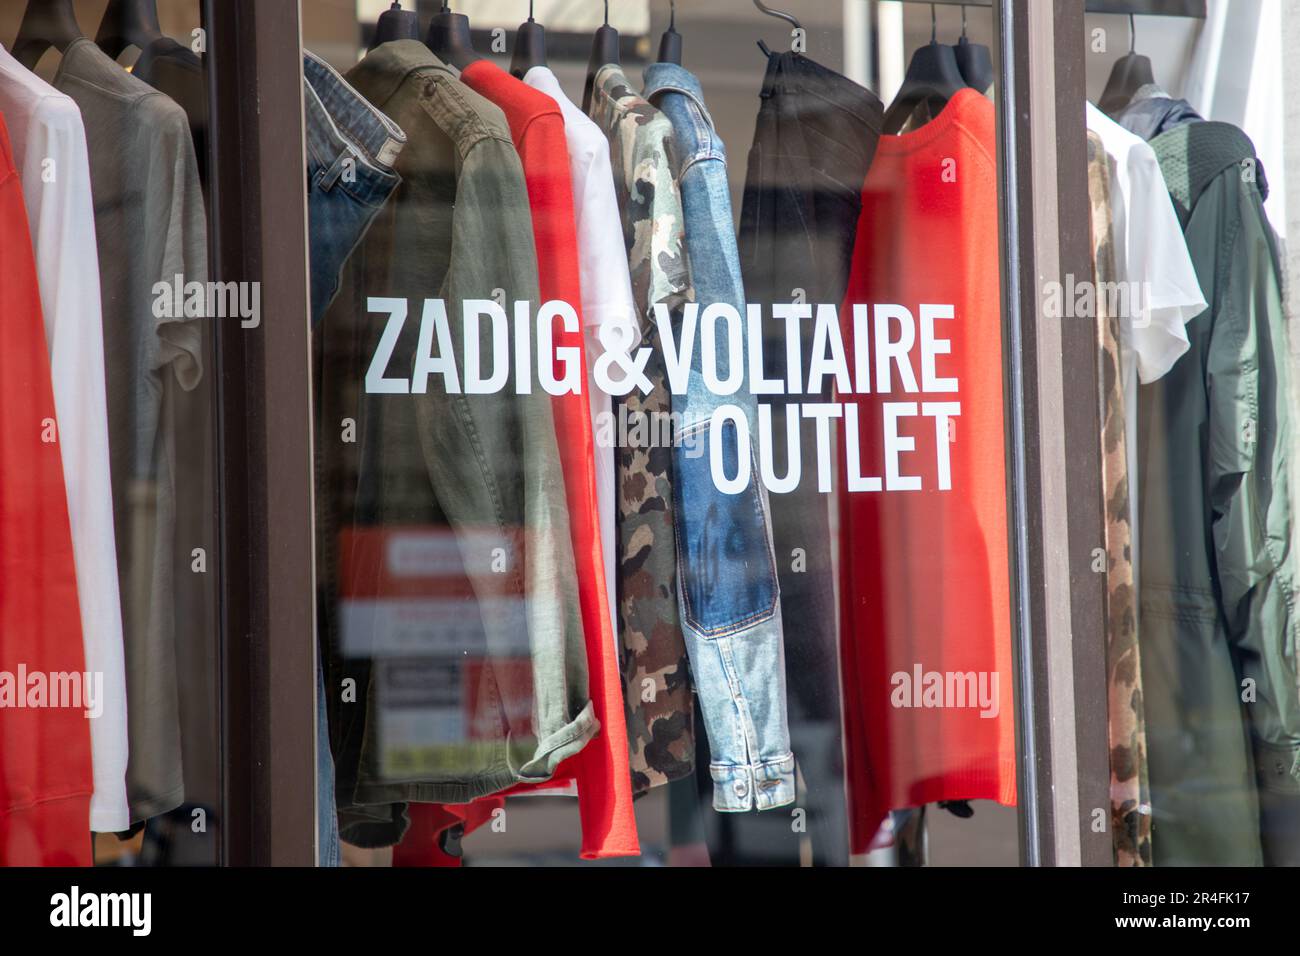 Zadig & Voltaire  The Perfume Shop